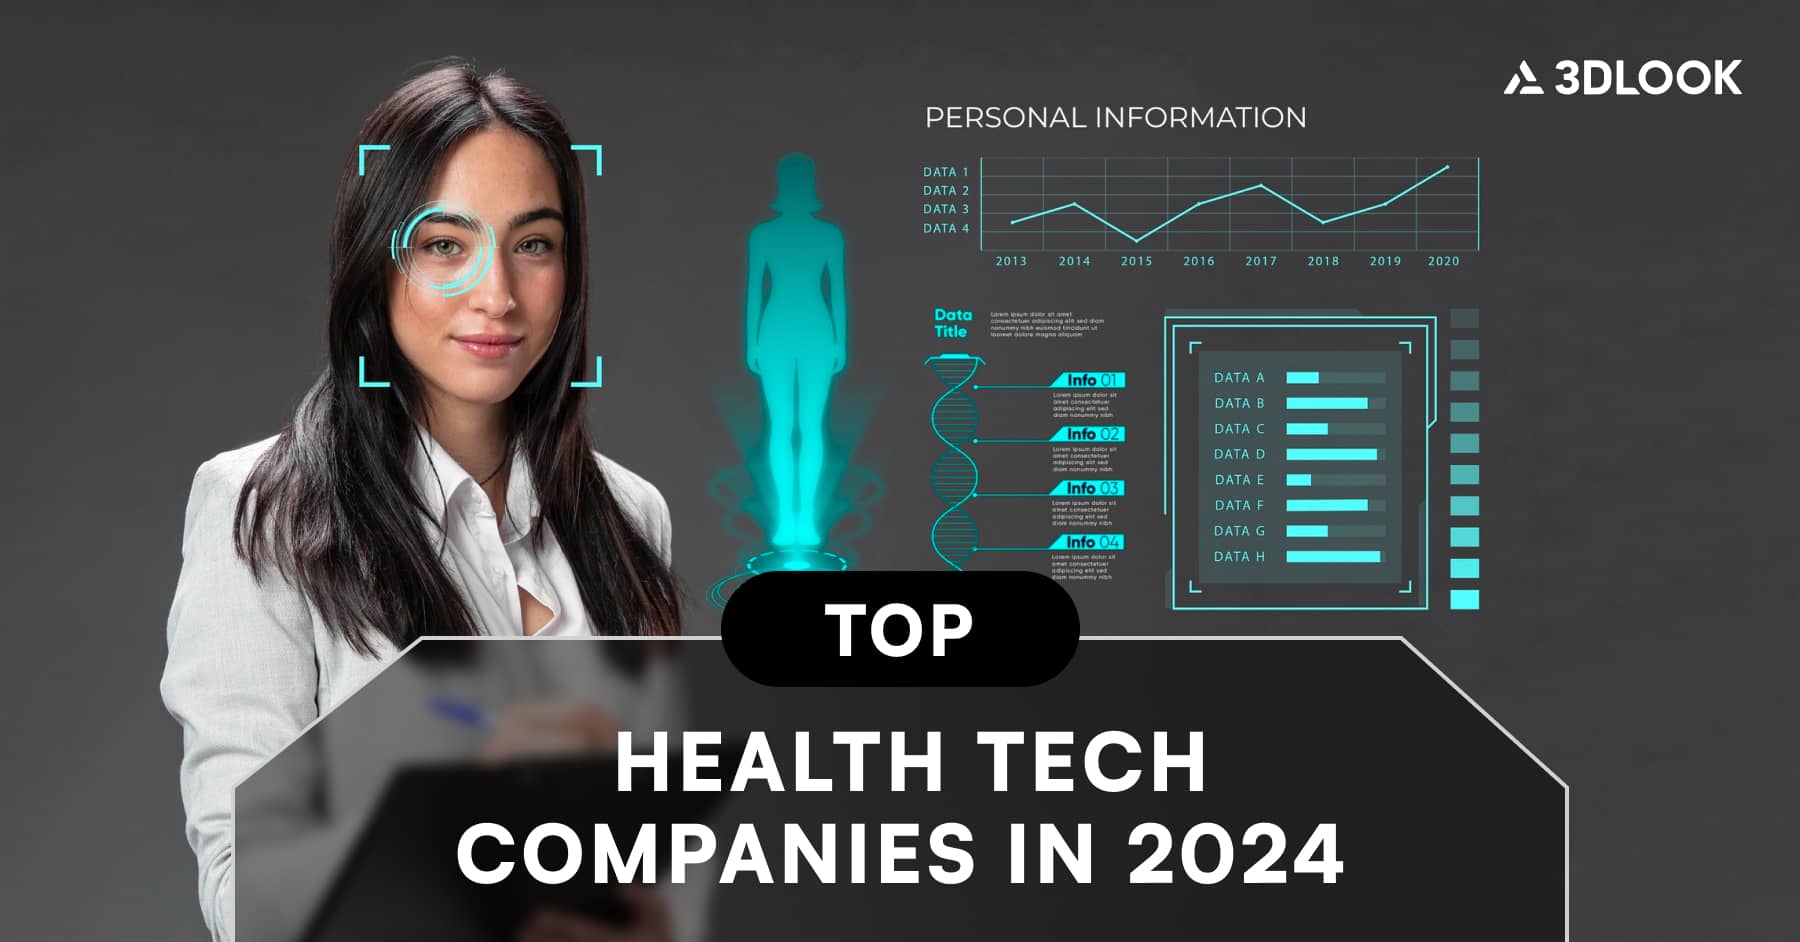 Image of a woman with digital health data graphics surrounding her. Text reads: "Top Health Tech Companies in 2024" with the 3DLOOK logo in the top right, highlighting advancements shaping the future of healthcare.